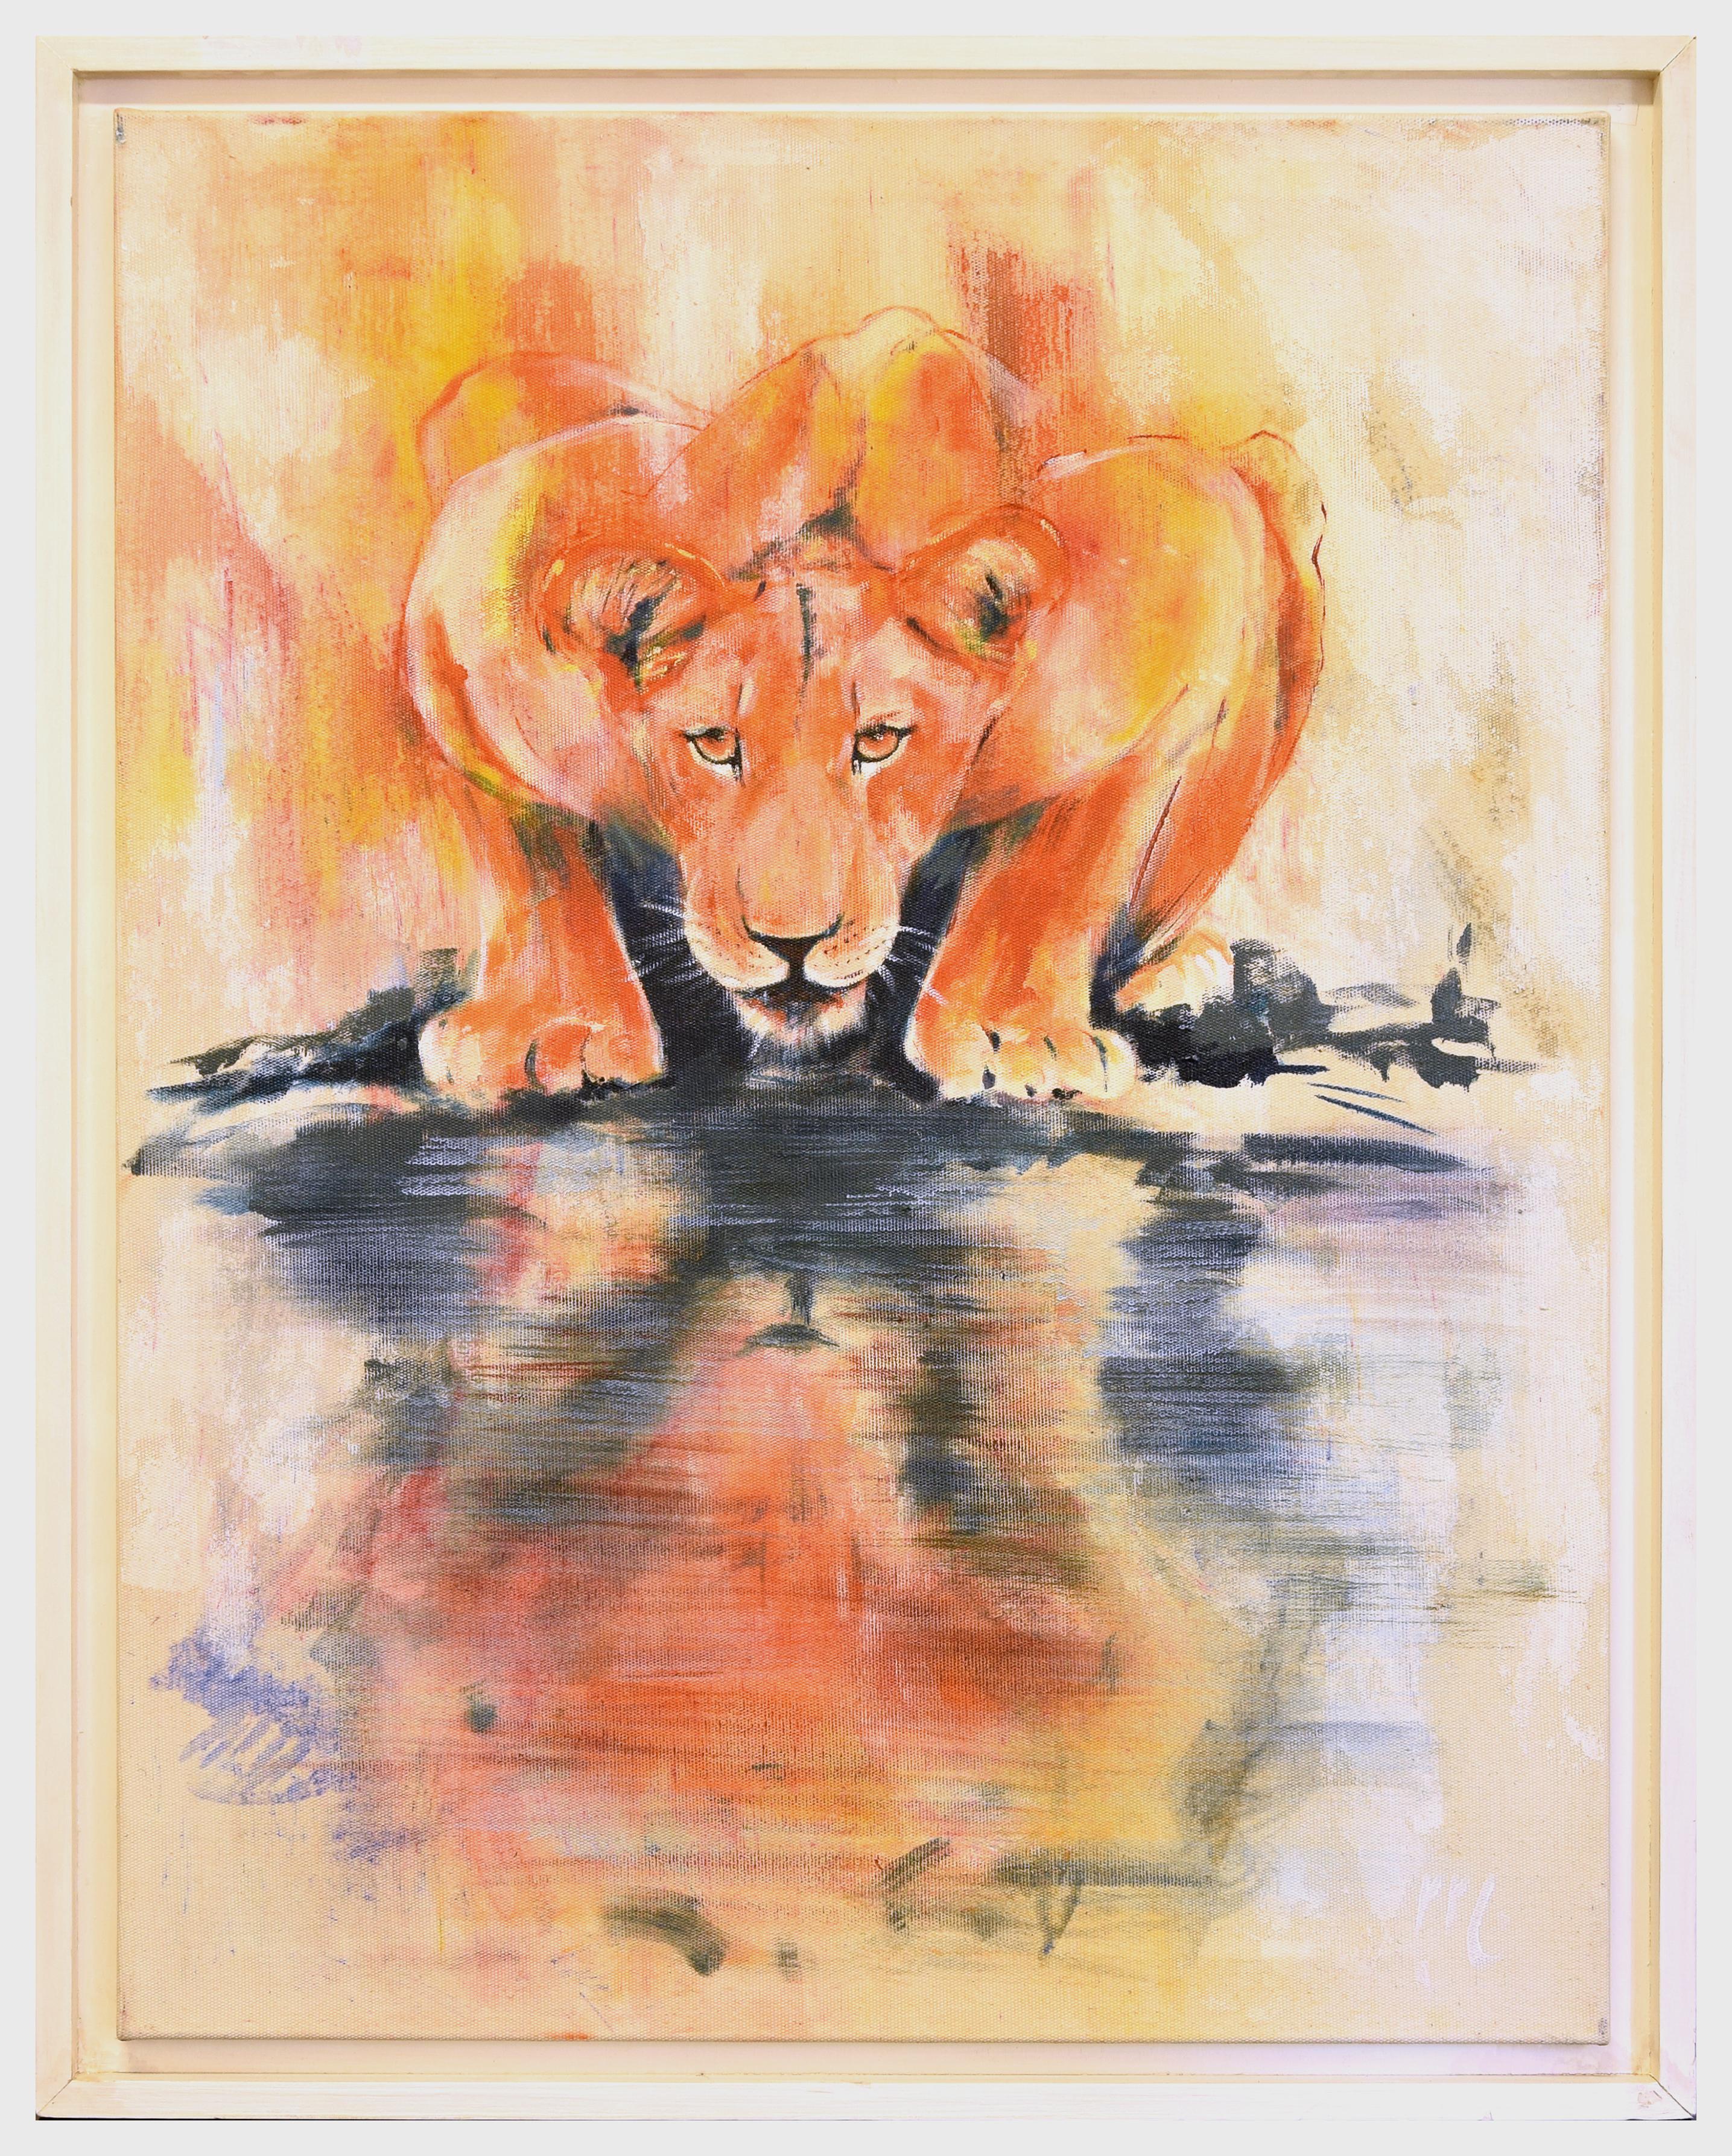 Lioness by the Water - Oil on Canvas by Marij Hendrickx - Early 2000s